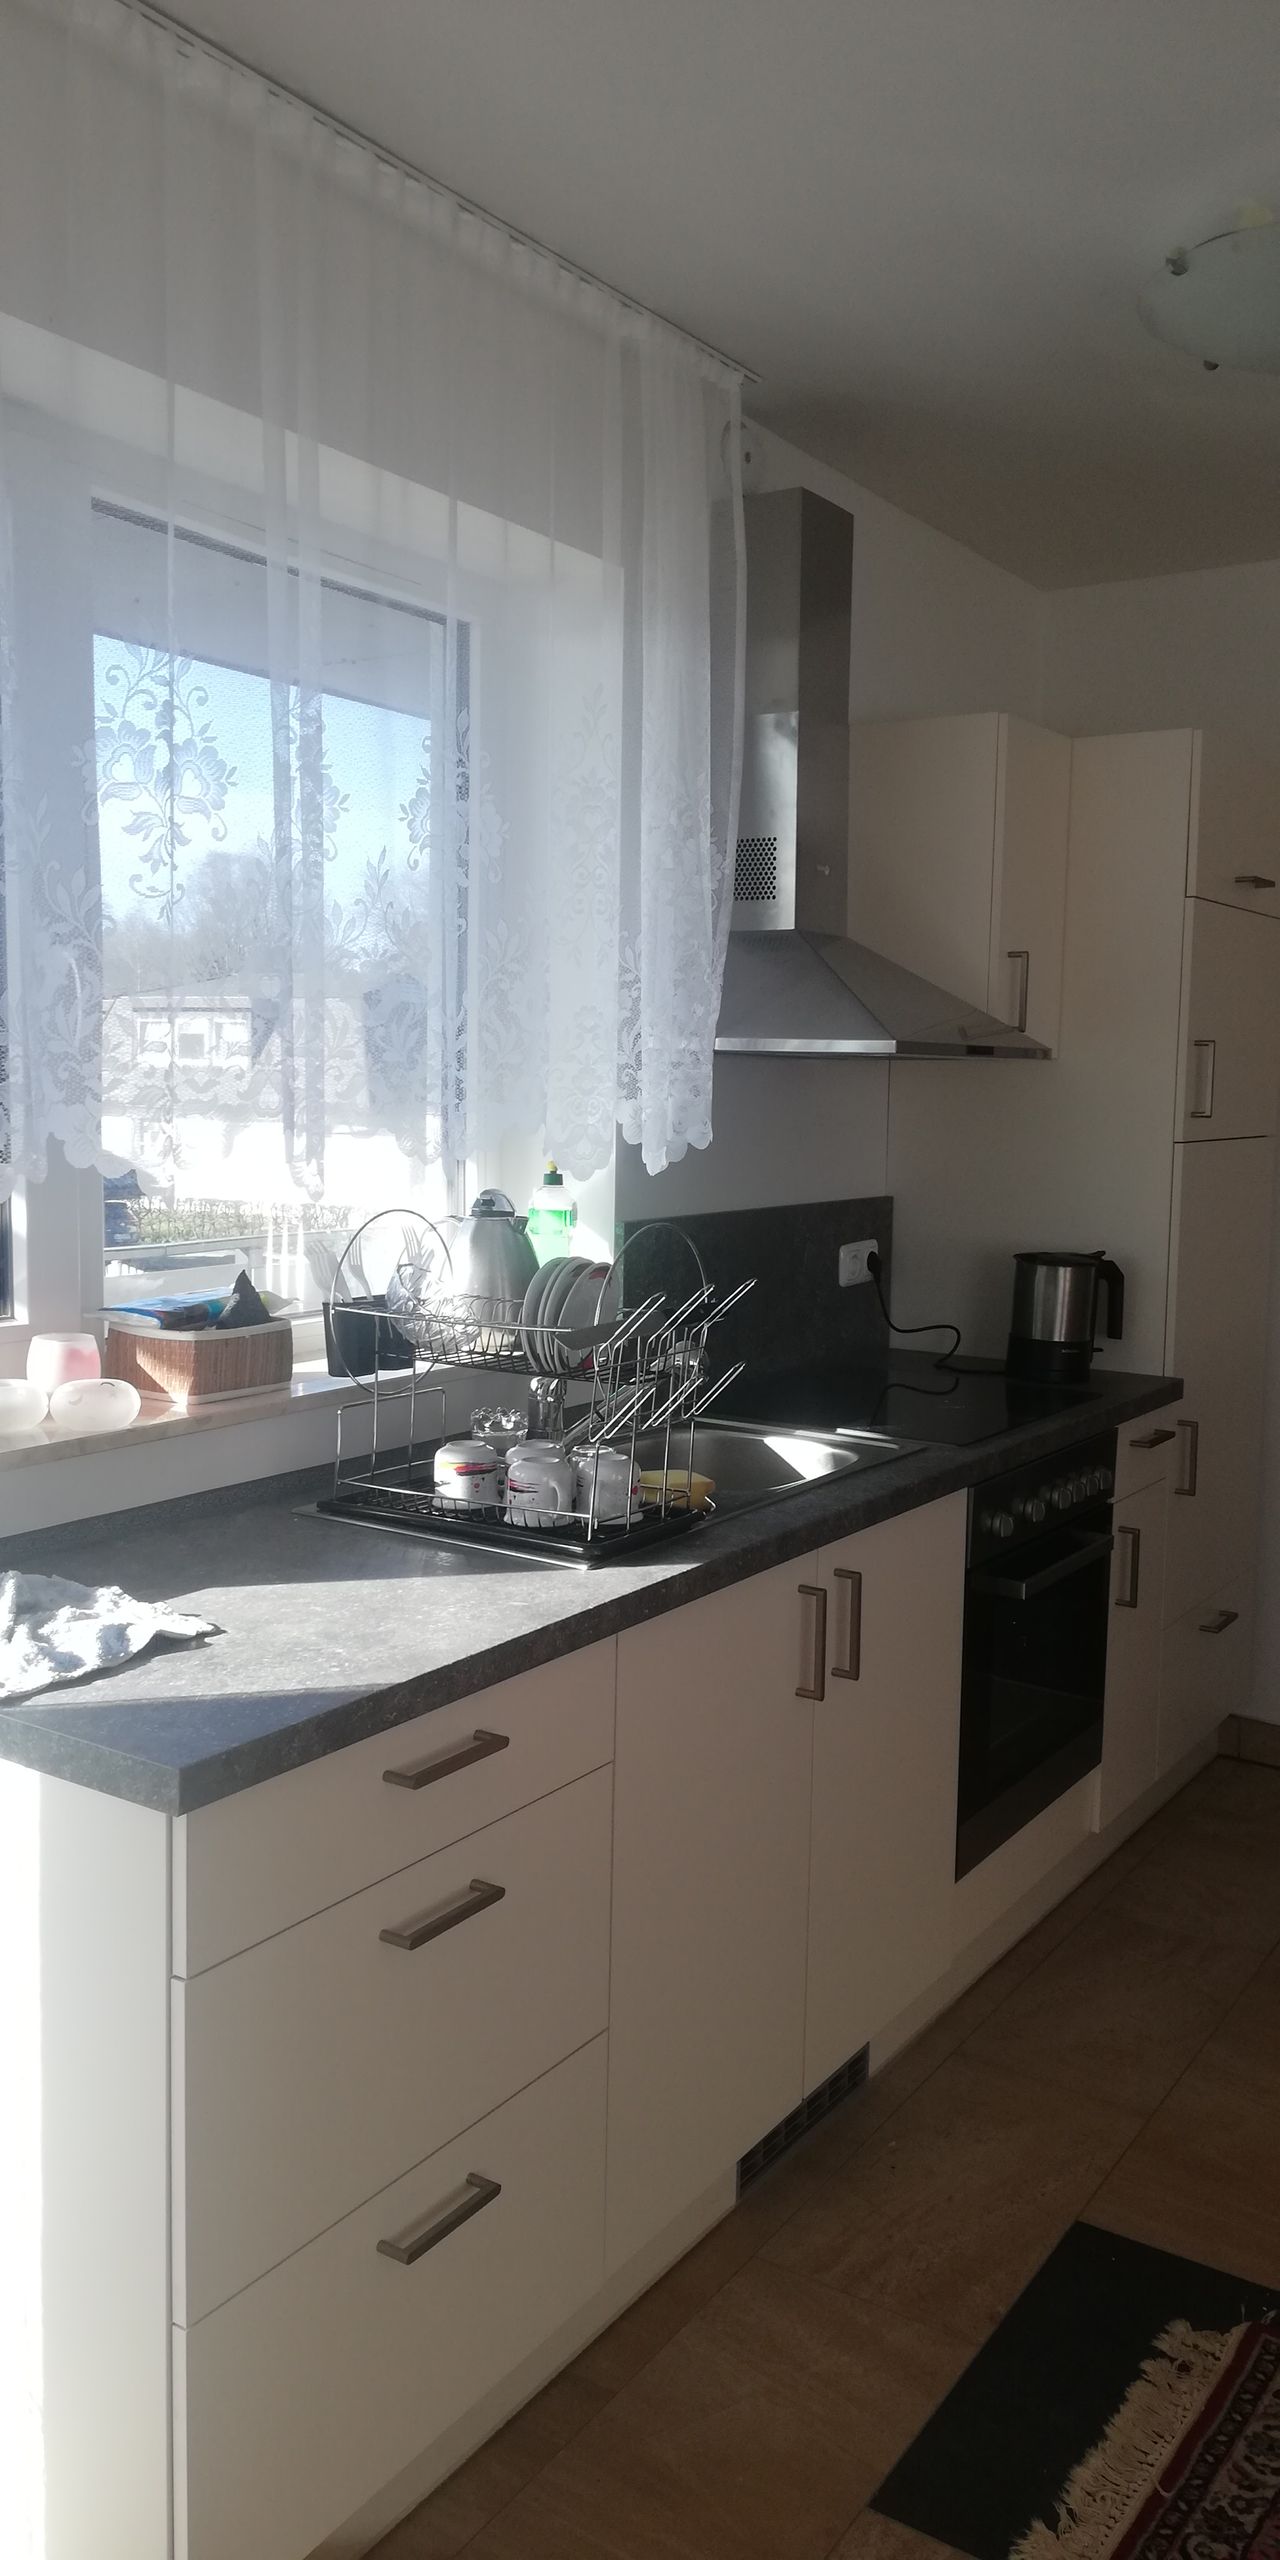 Fantastic, modern new apartment in Flensburg with a view of the Baltic Sea